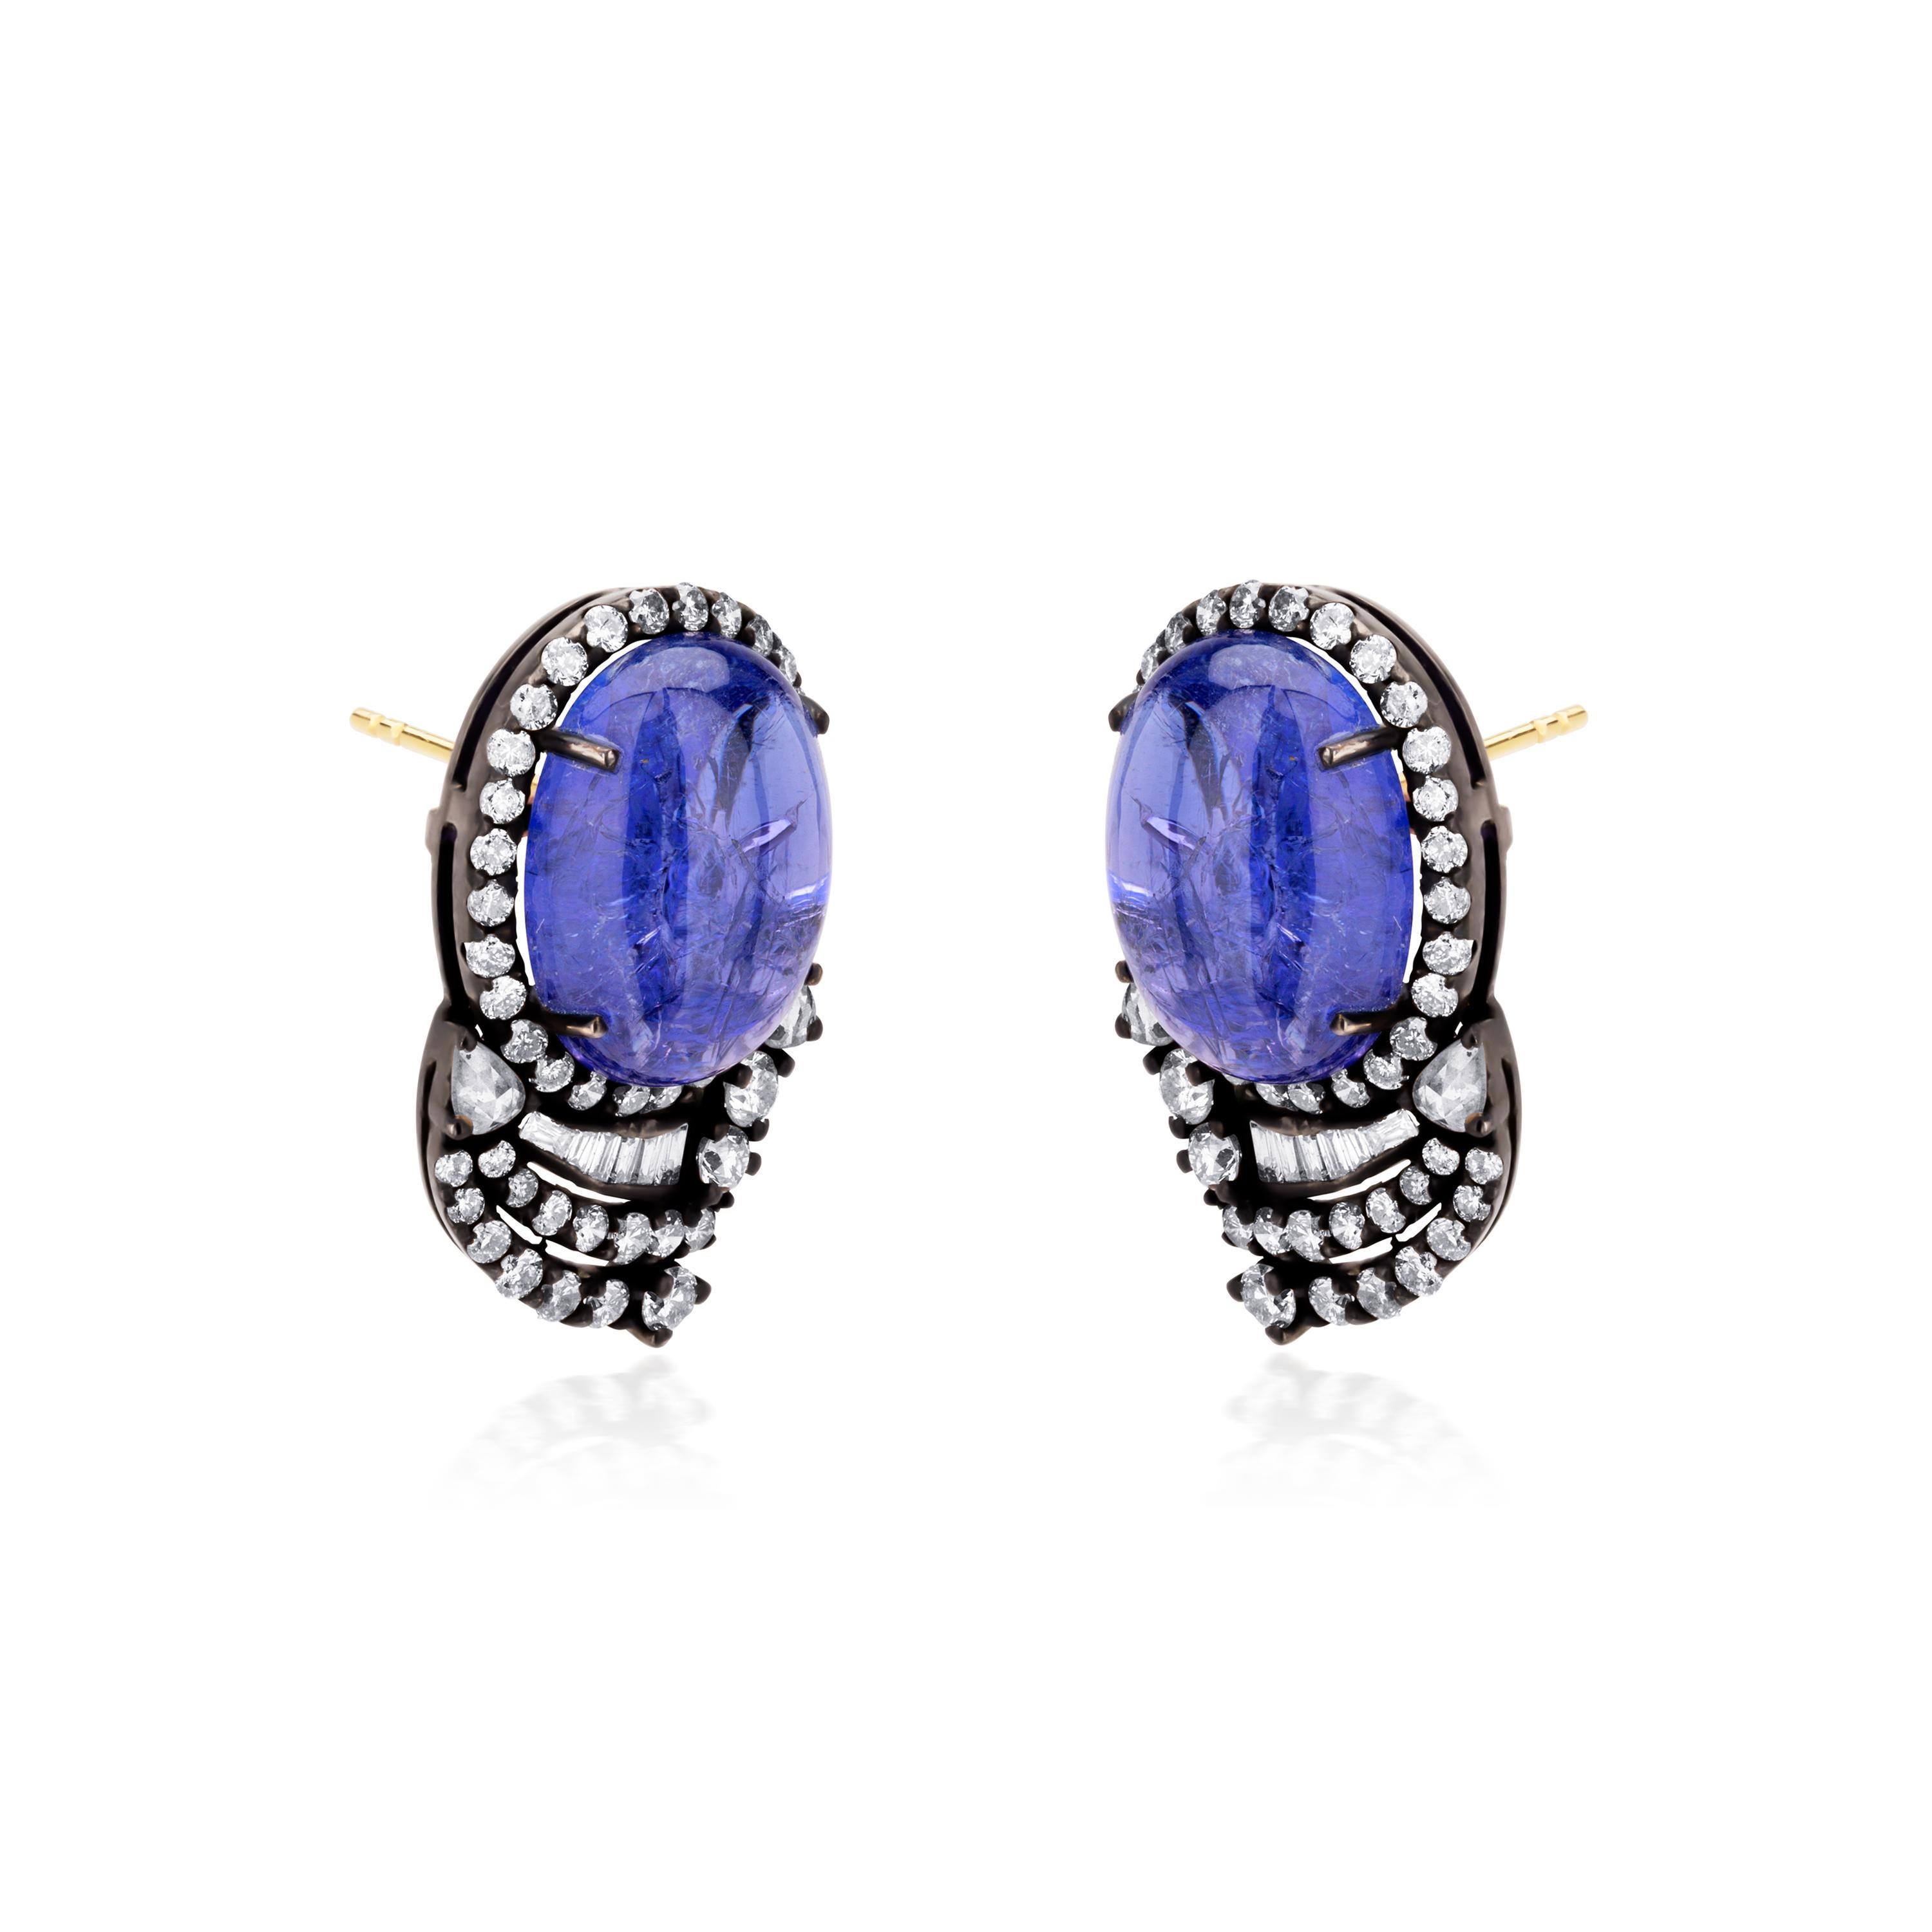 Victorian 25.05 Carat T.W Tanzanite & Diamond Stud Earrings in 18k Gold, Silver In New Condition For Sale In New York, NY